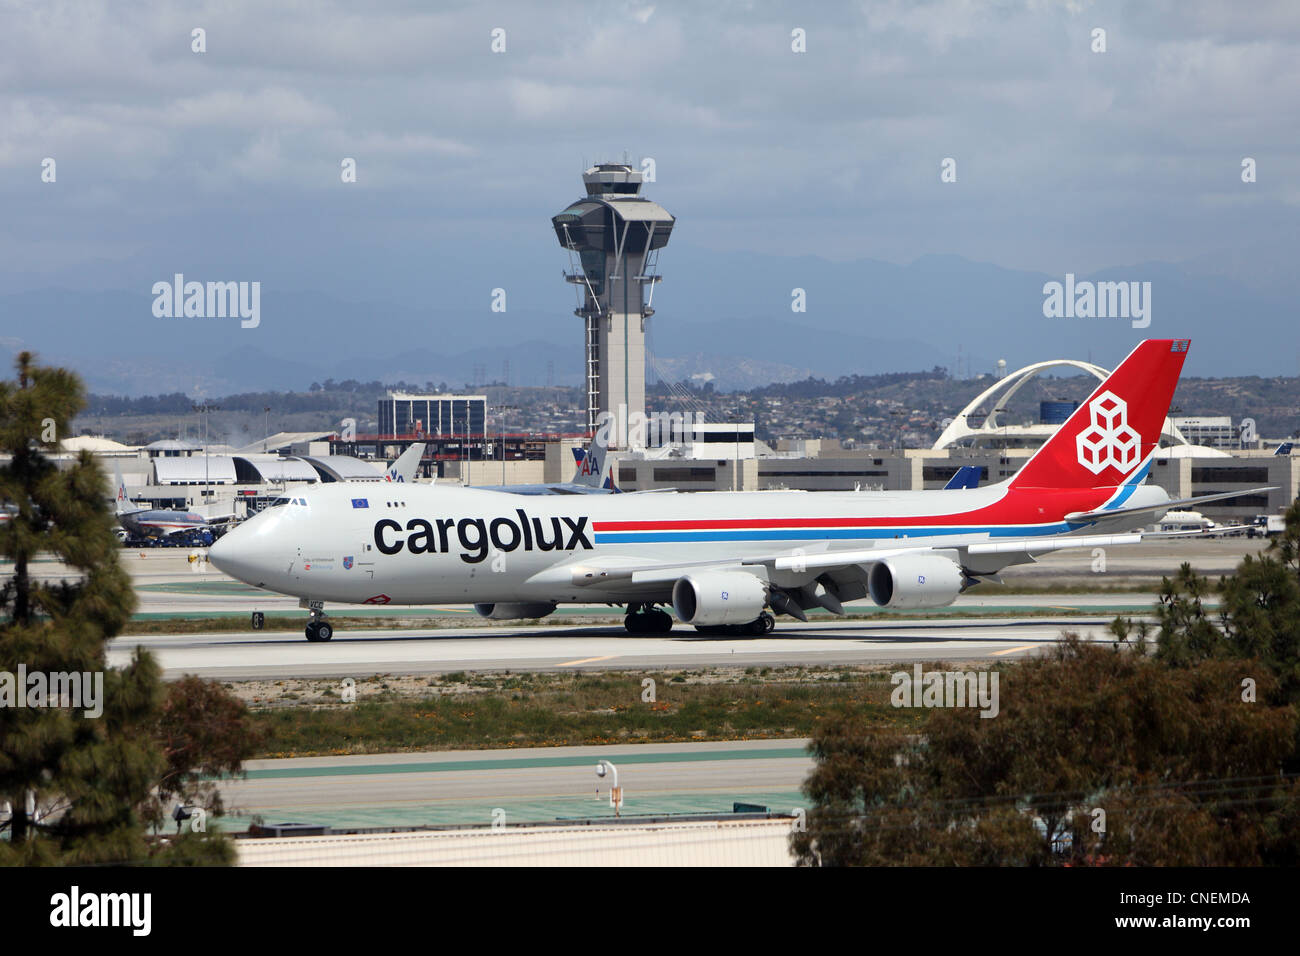 LOS ANGELES, CALIFORNIA, USA - APRIL 12, 2012 - Cargolux B747-8 Freighter jet plane taxis to the cargo terminal at Los Angeles. Stock Photo